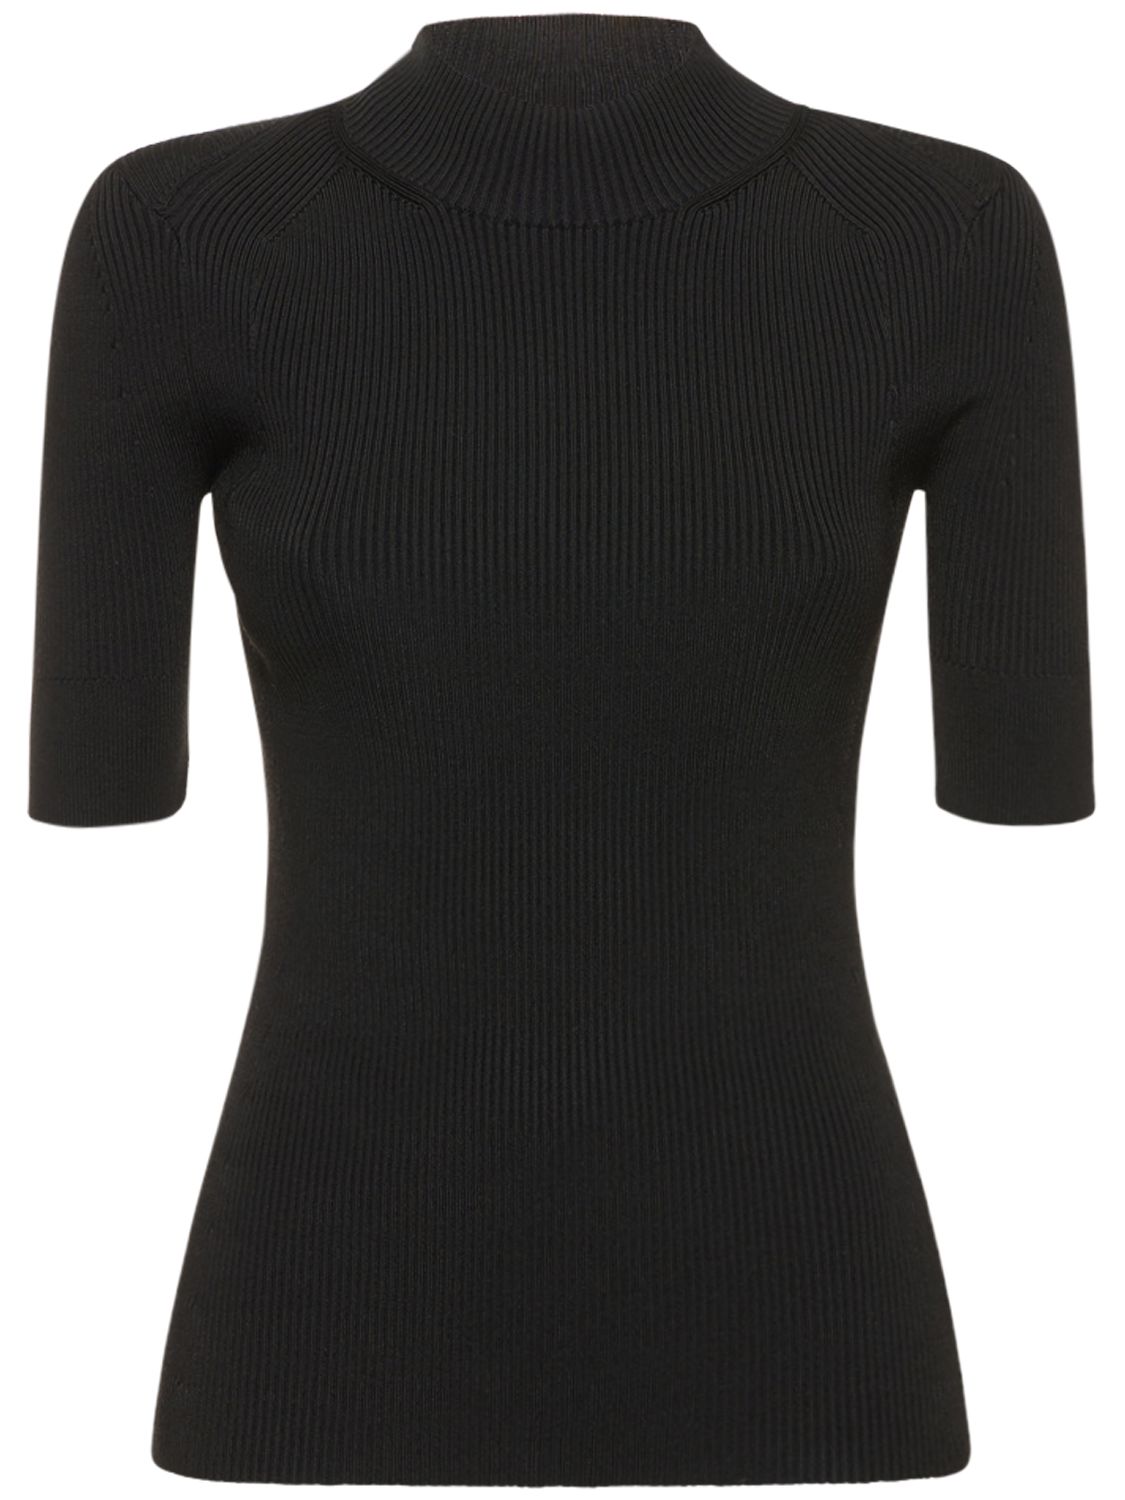 Compact Rib Knit Technical Top